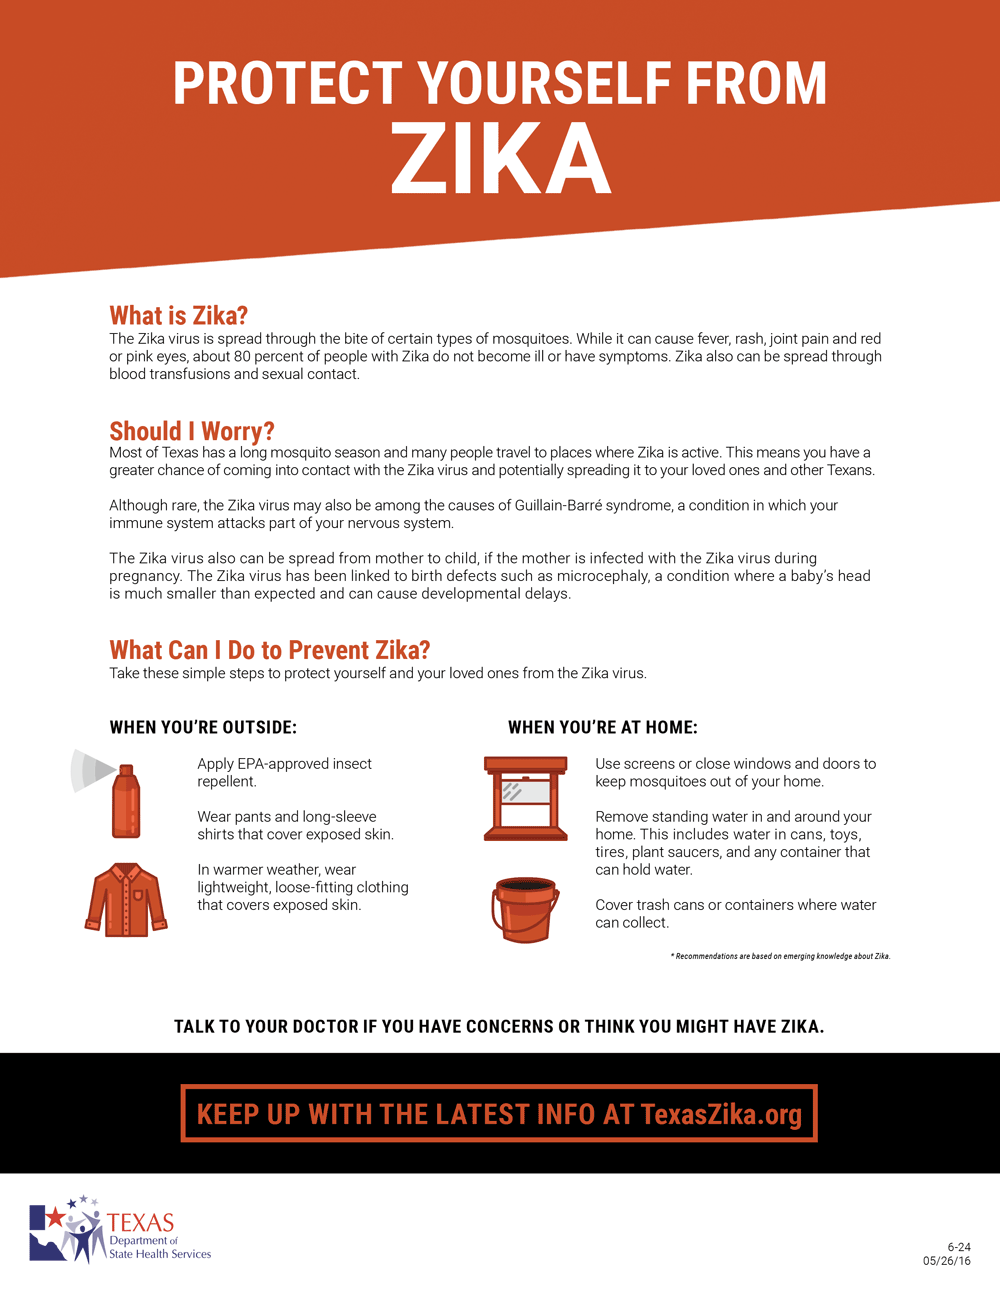 Protect Yourself from Zika